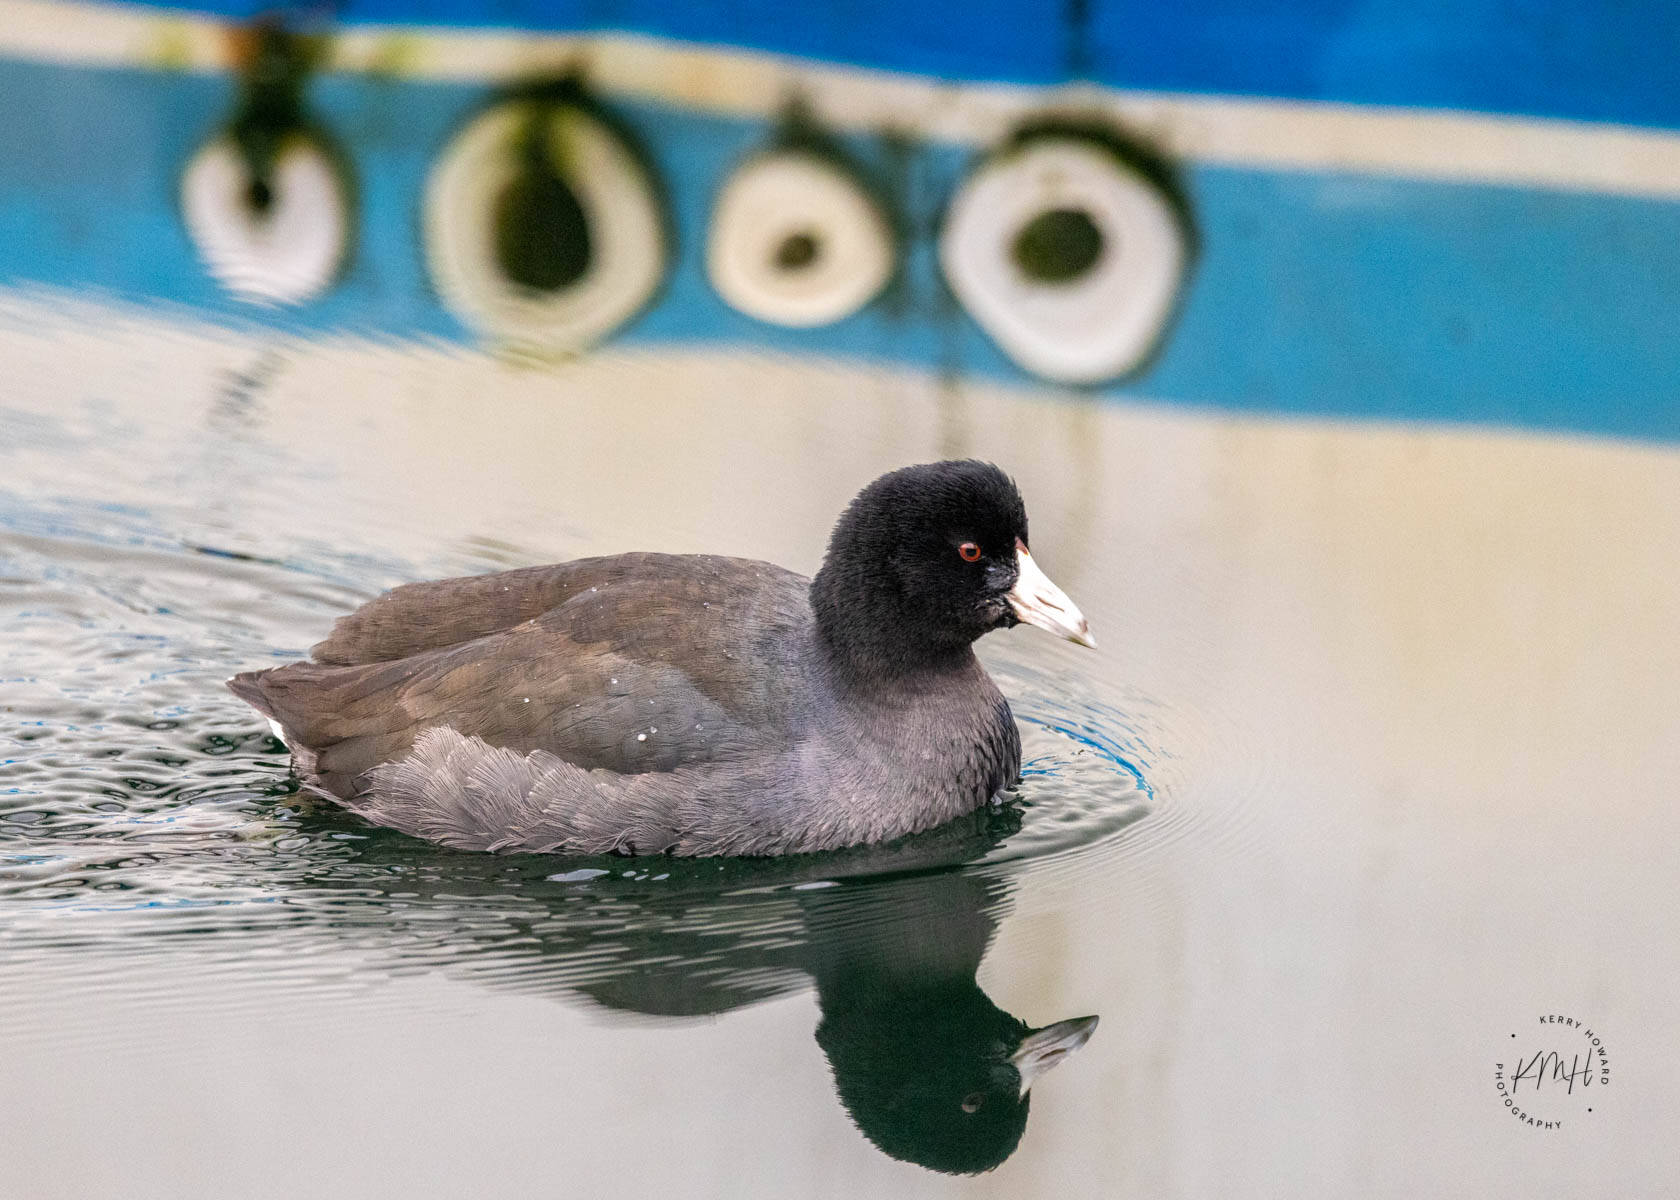 An American coot spent time in Auke Bay this winter, farther north than usual. (Courtesy Photo / Kerry Howard)